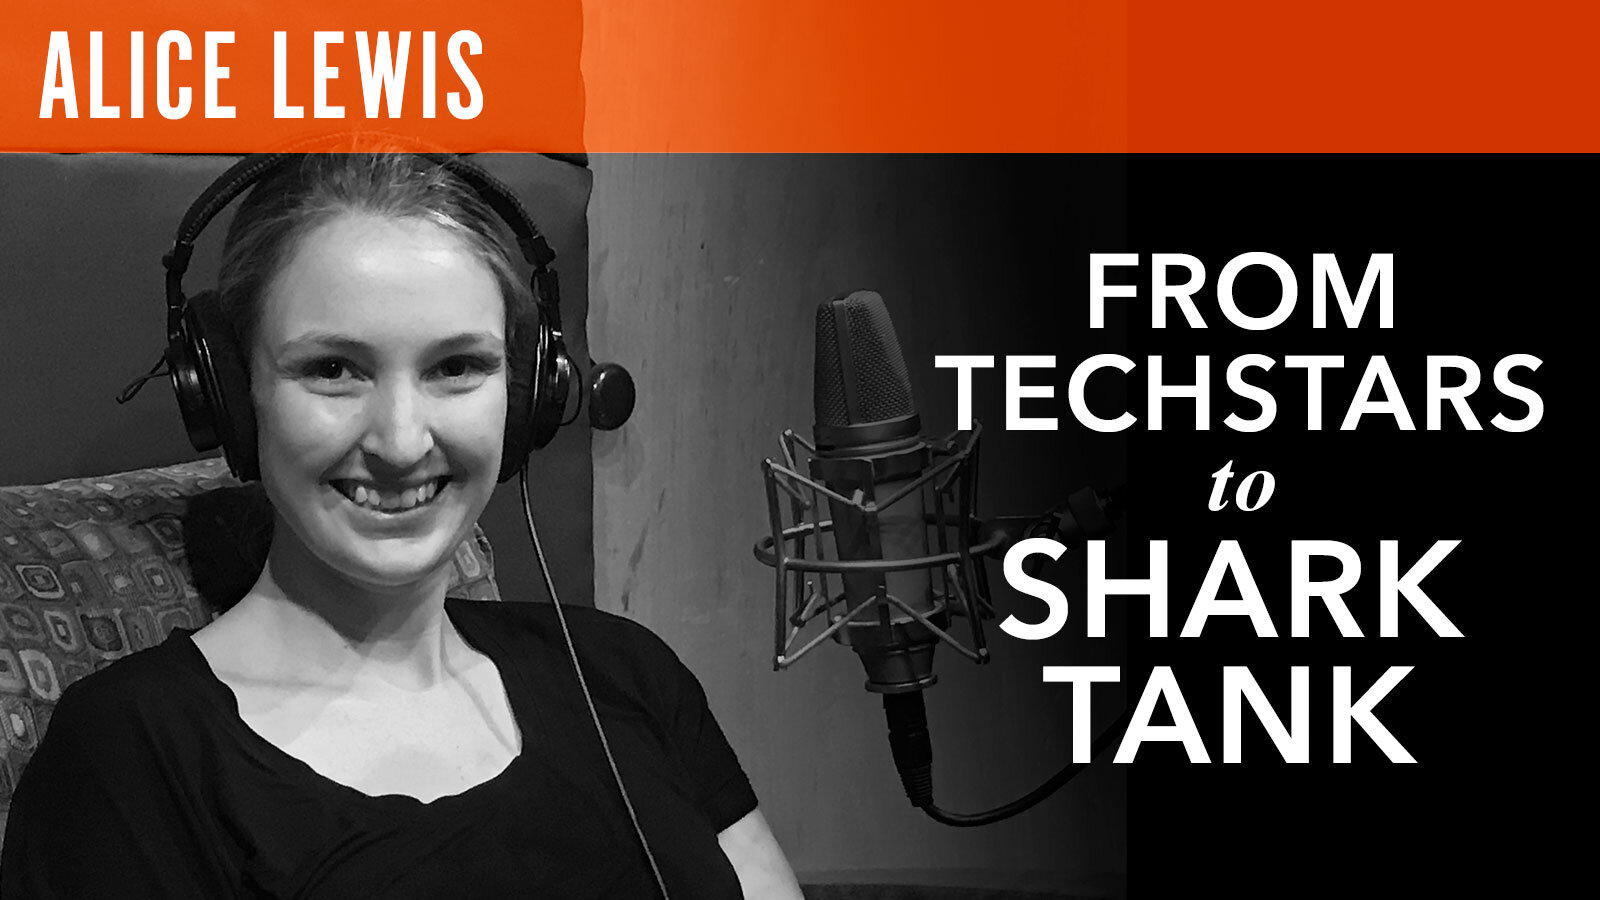 Alice Lewis, "From Techstars to Shark Tank"